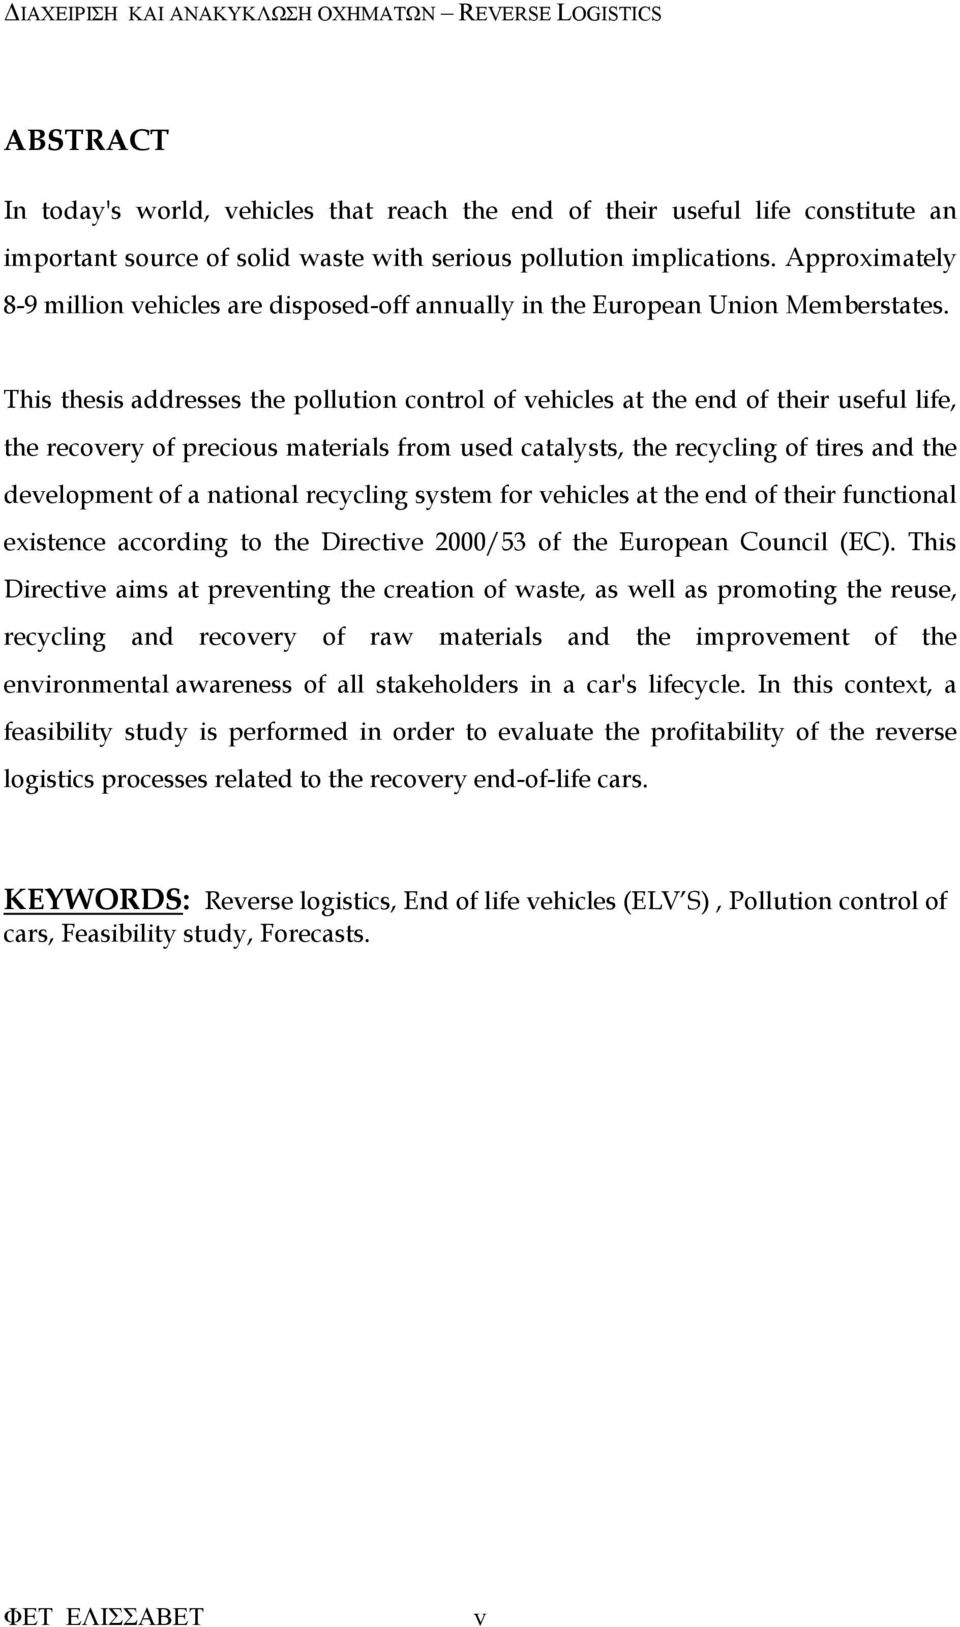 This thesis addresses the pollution control of vehicles at the end of their useful life, the recovery of precious materials from used catalysts, the recycling of tires and the development of a